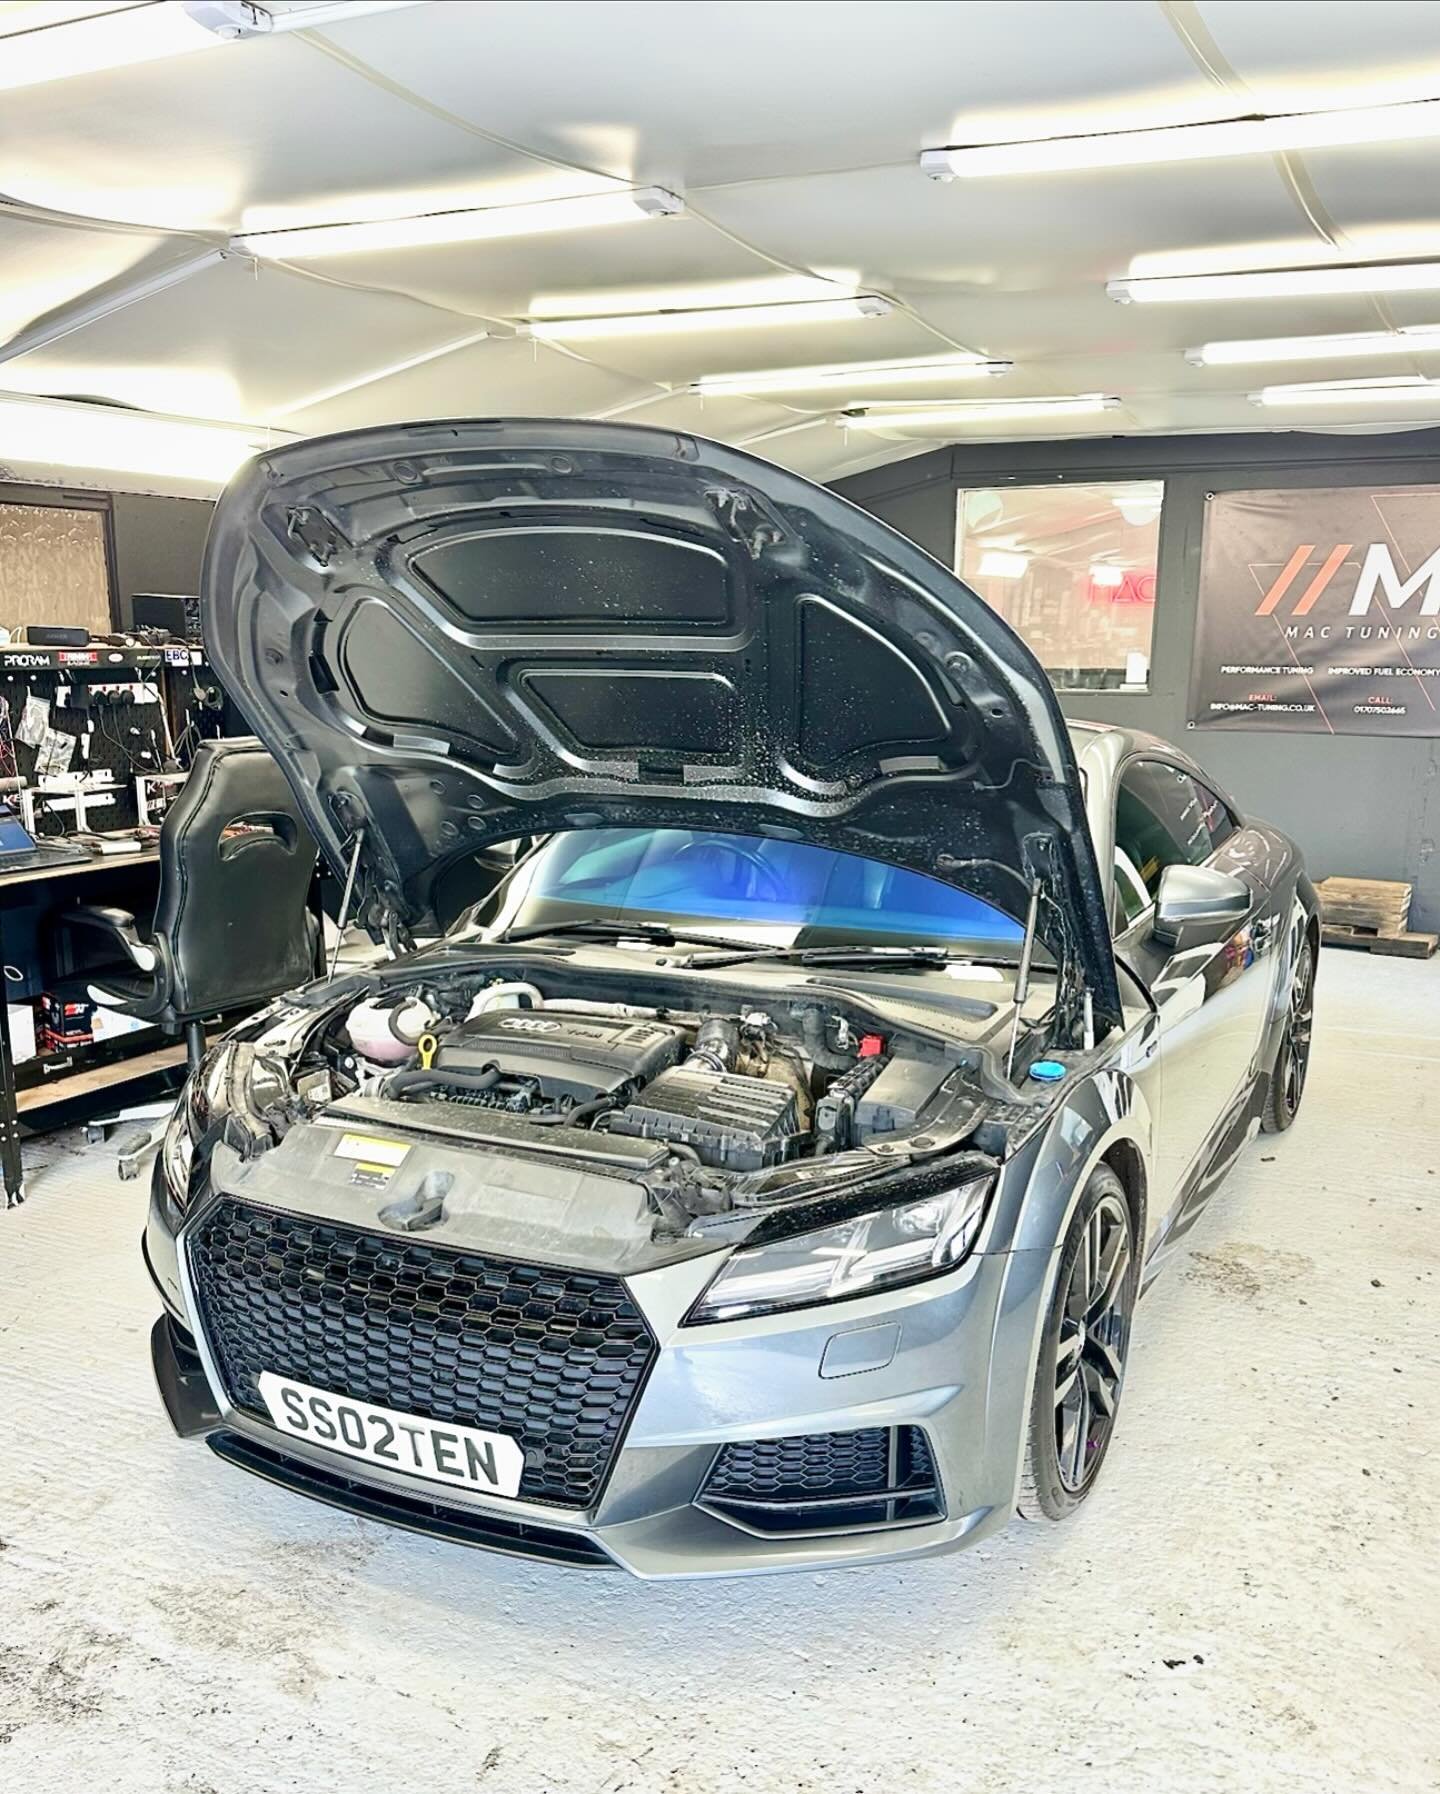 Stunning Audi TT in the workshop for our Stage 1 performance tuning!🔥 

Own an Audi and looking for more power? Get in contact to find out what we can do for you ☑️

➖➖➖➖➖➖➖➖➖➖➖➖➖

📱01707502665
📧 info@mac-tuning.co.uk
💻 www.mac-tuning.co.uk
📈 4 